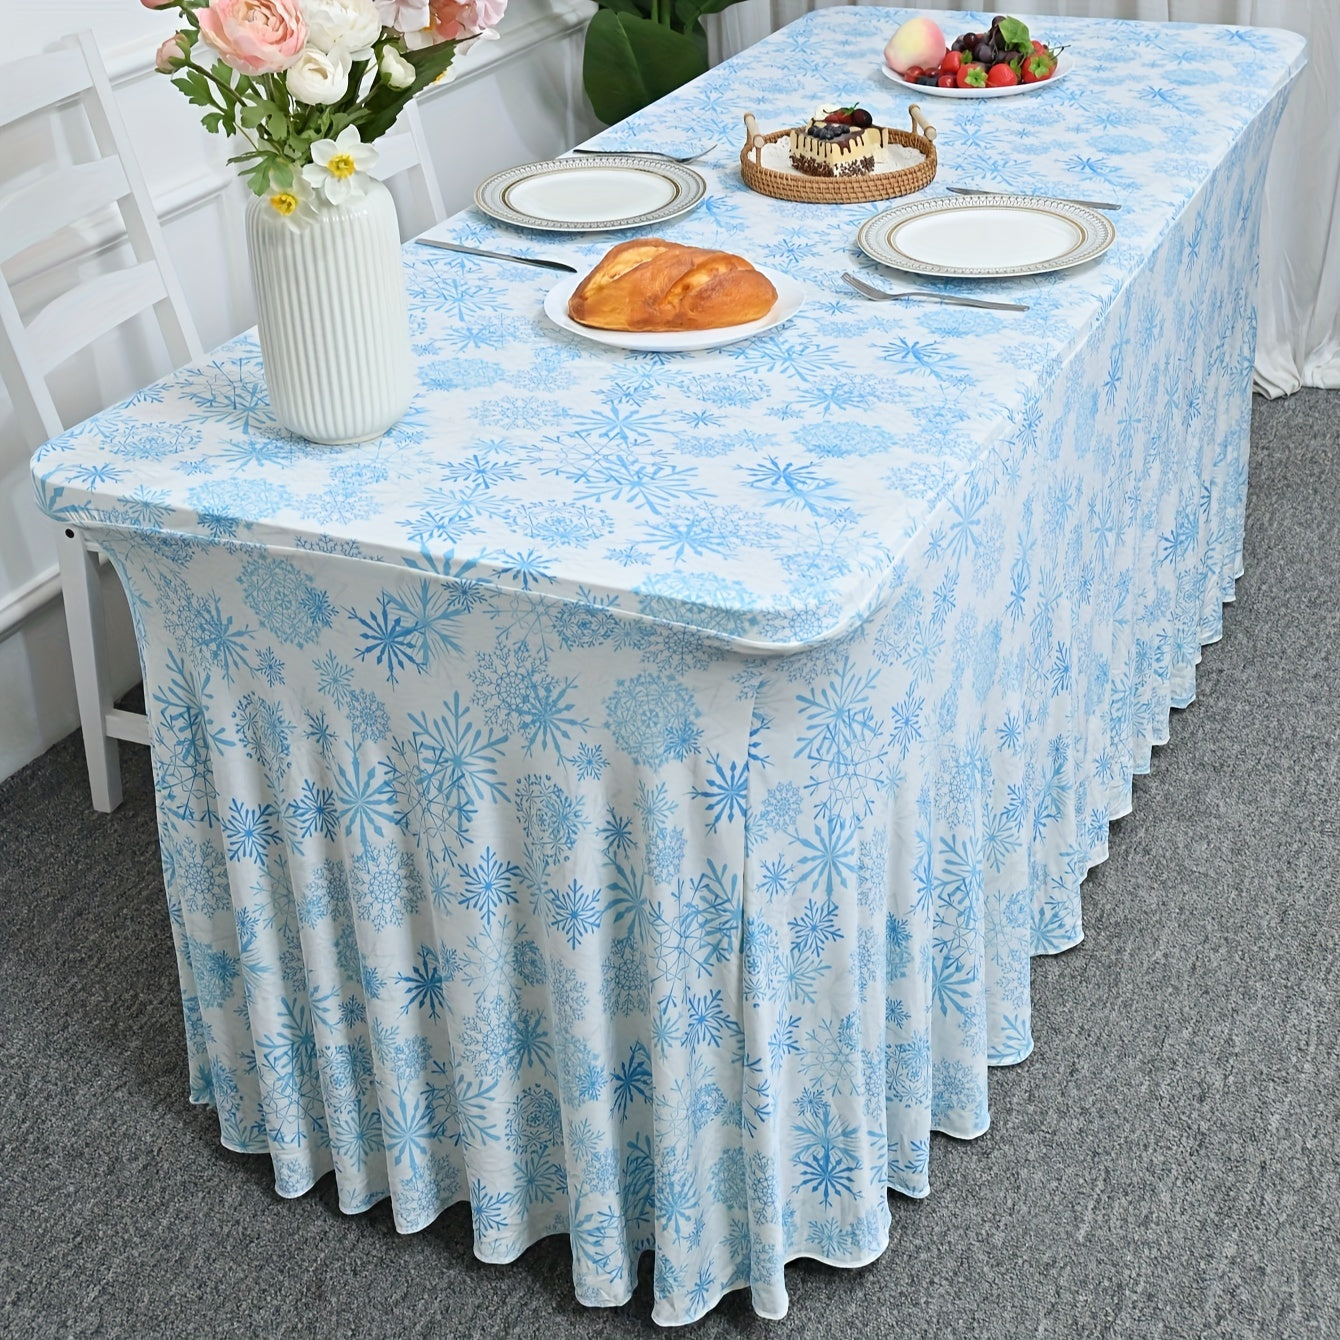 Bulk Waterproof Snowflake Pattern Tablecloth Suitable for Wedding and Holiday Party Decoration Wholesale